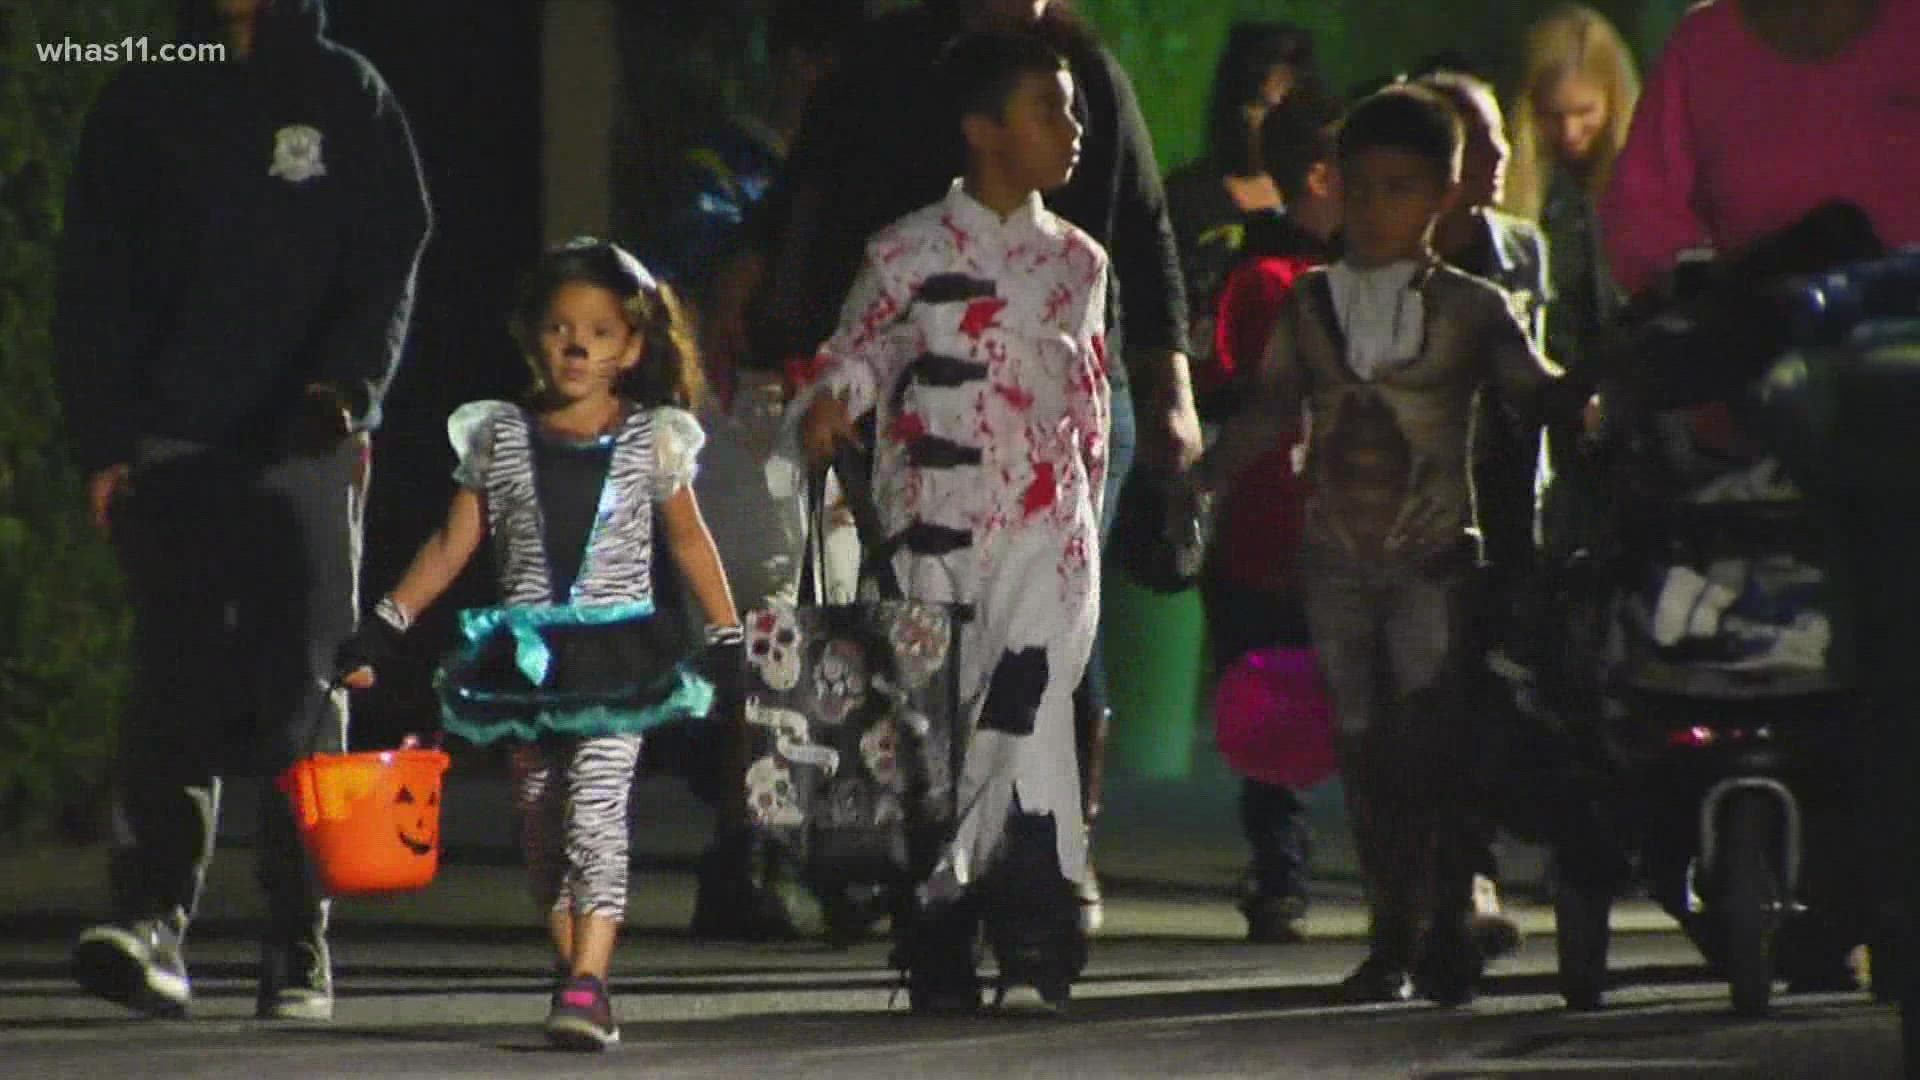 Halloween creeps up on Tysons early with mall trick-or-treating